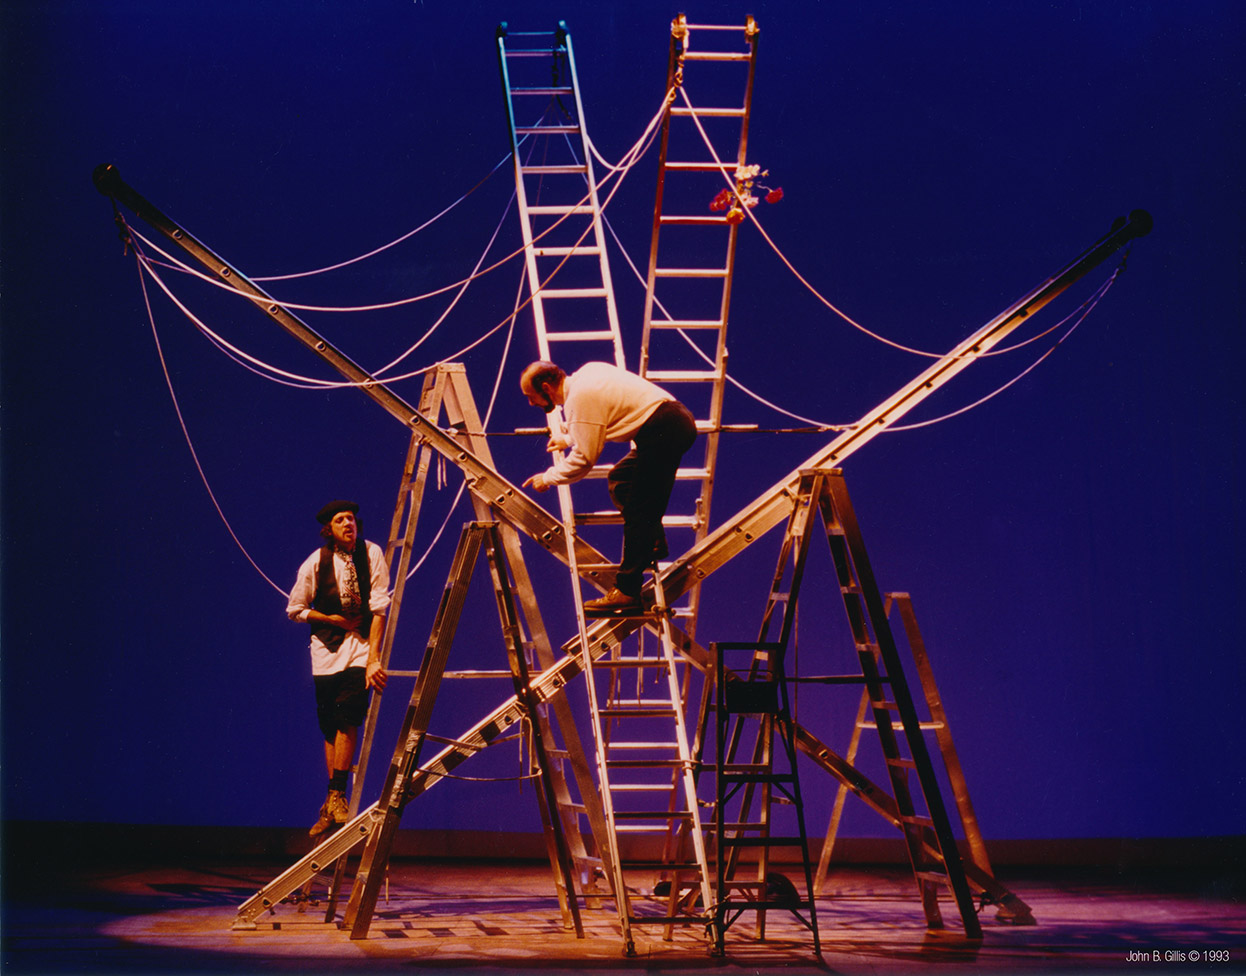 communityalbums - Scene from the play Panique à Longueuil (“Panic in Longueuil”), a production of the 